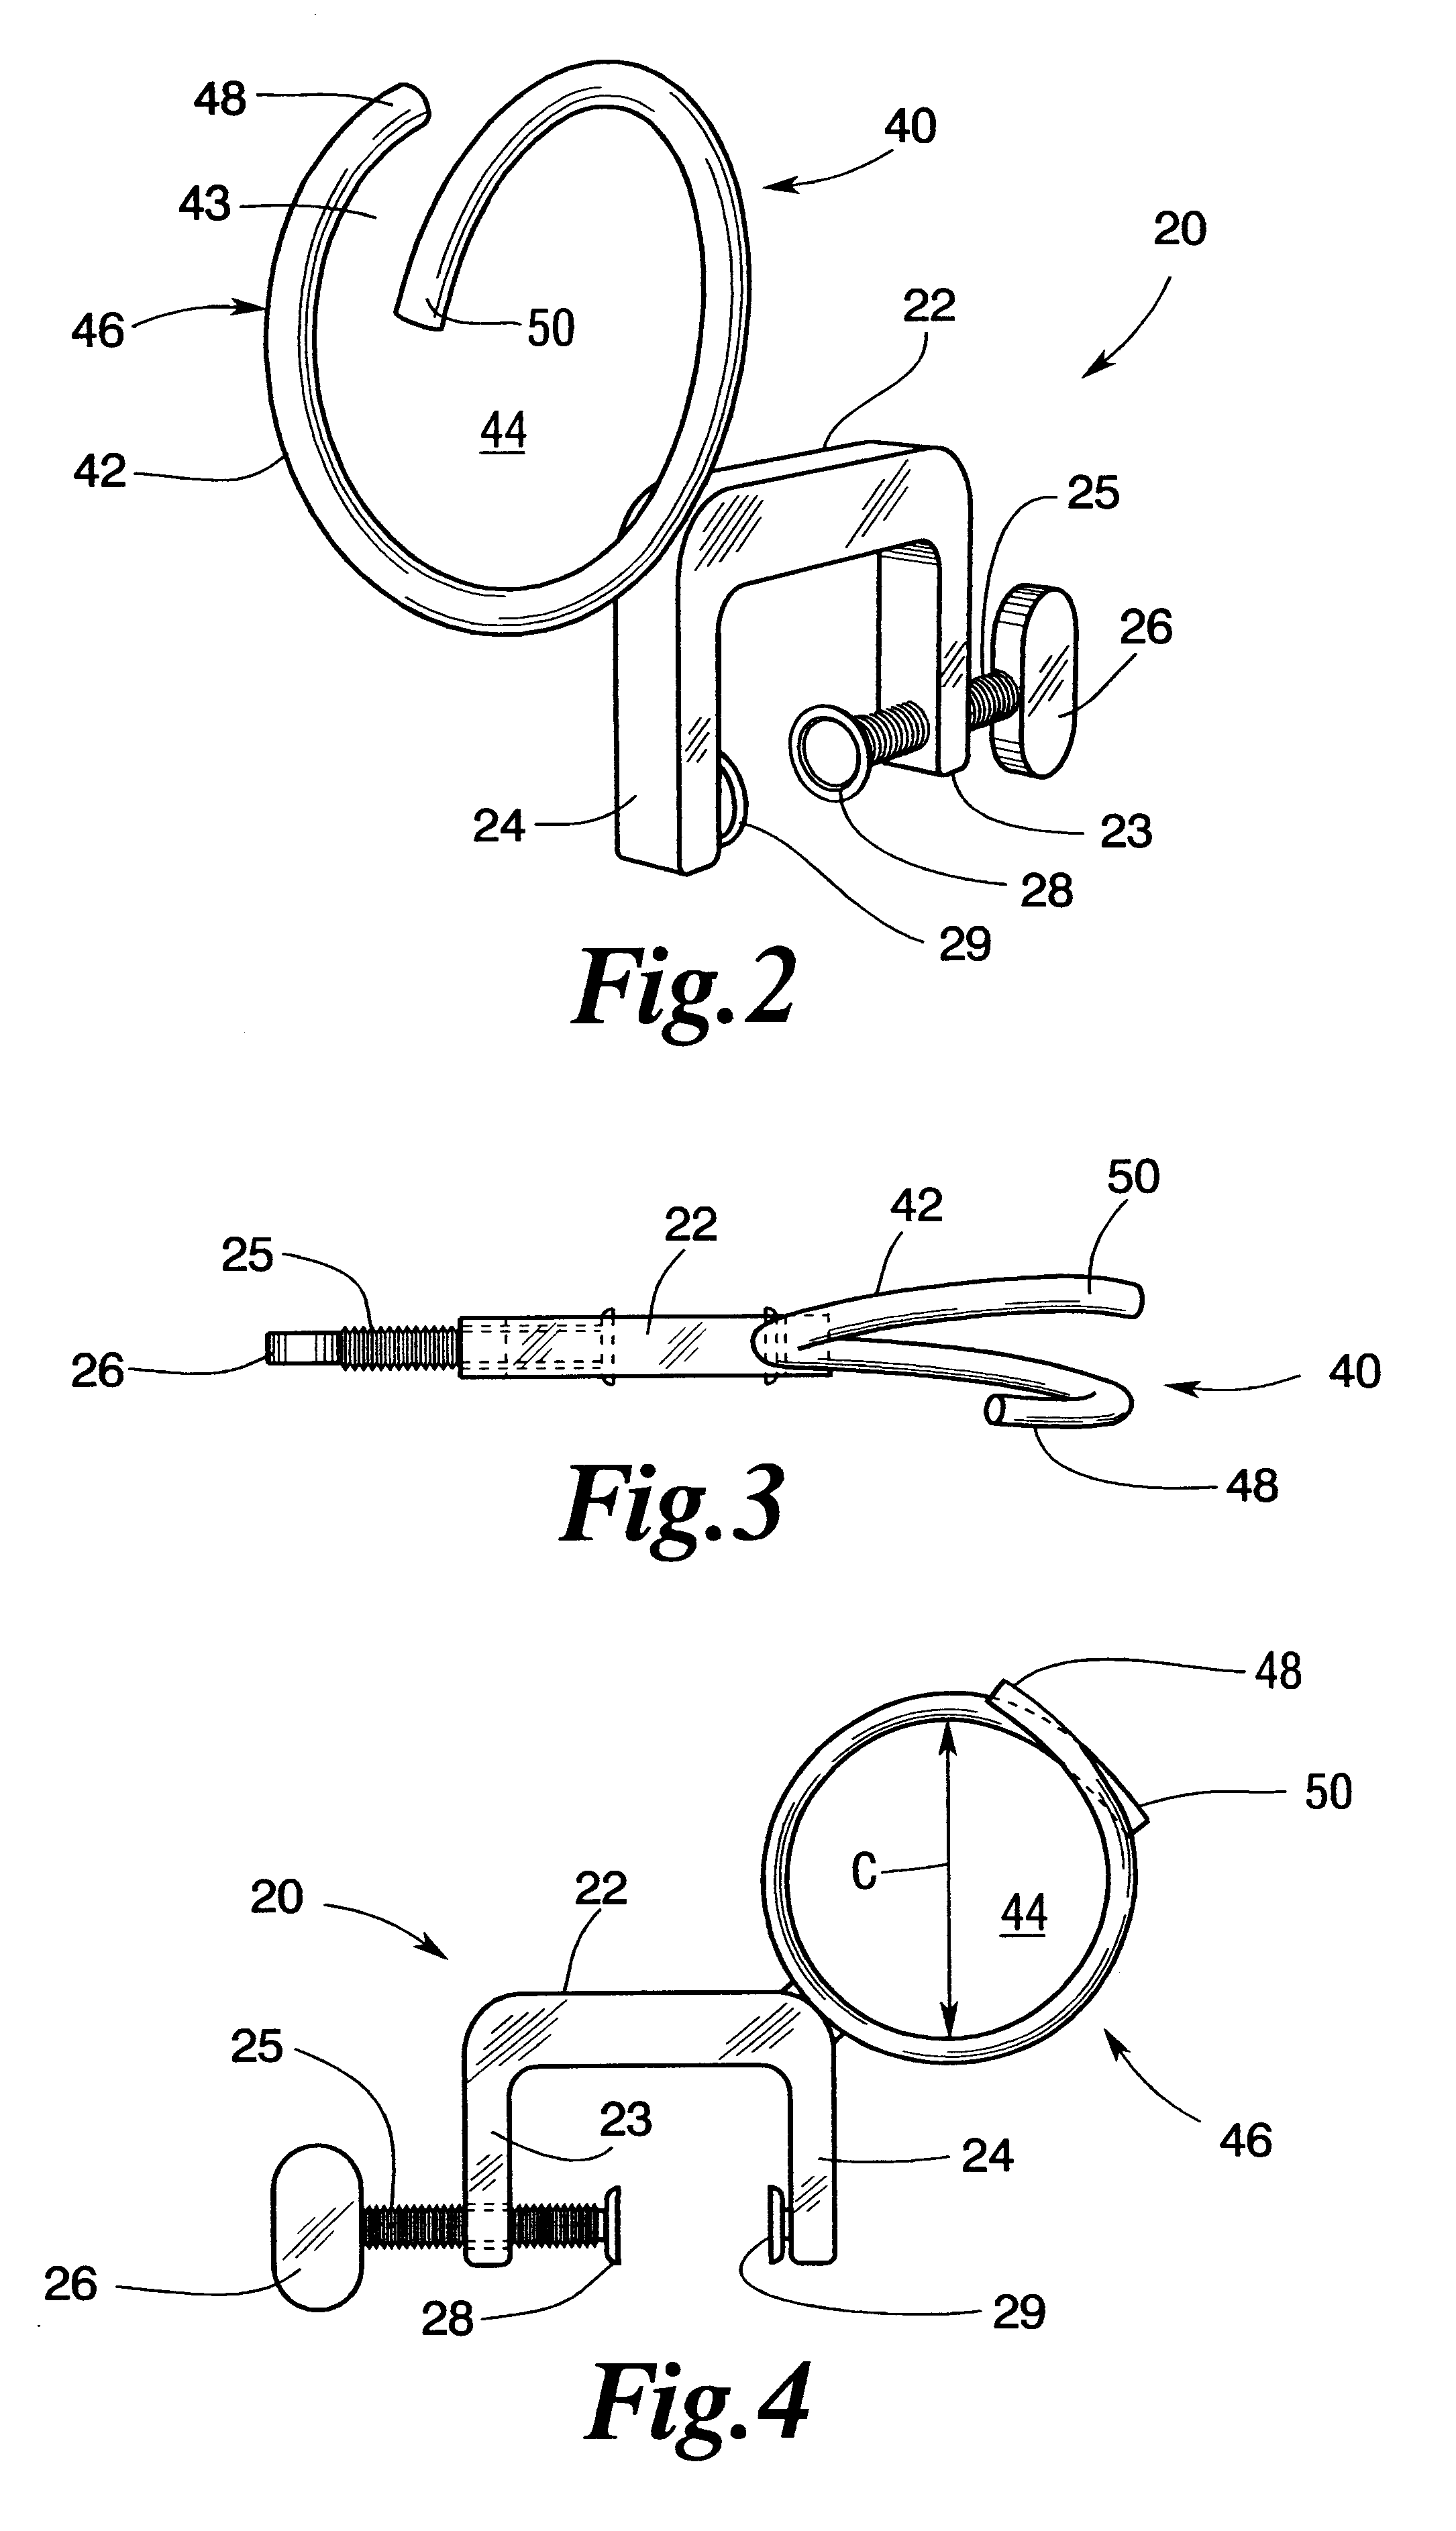 Removable cable support apparatus